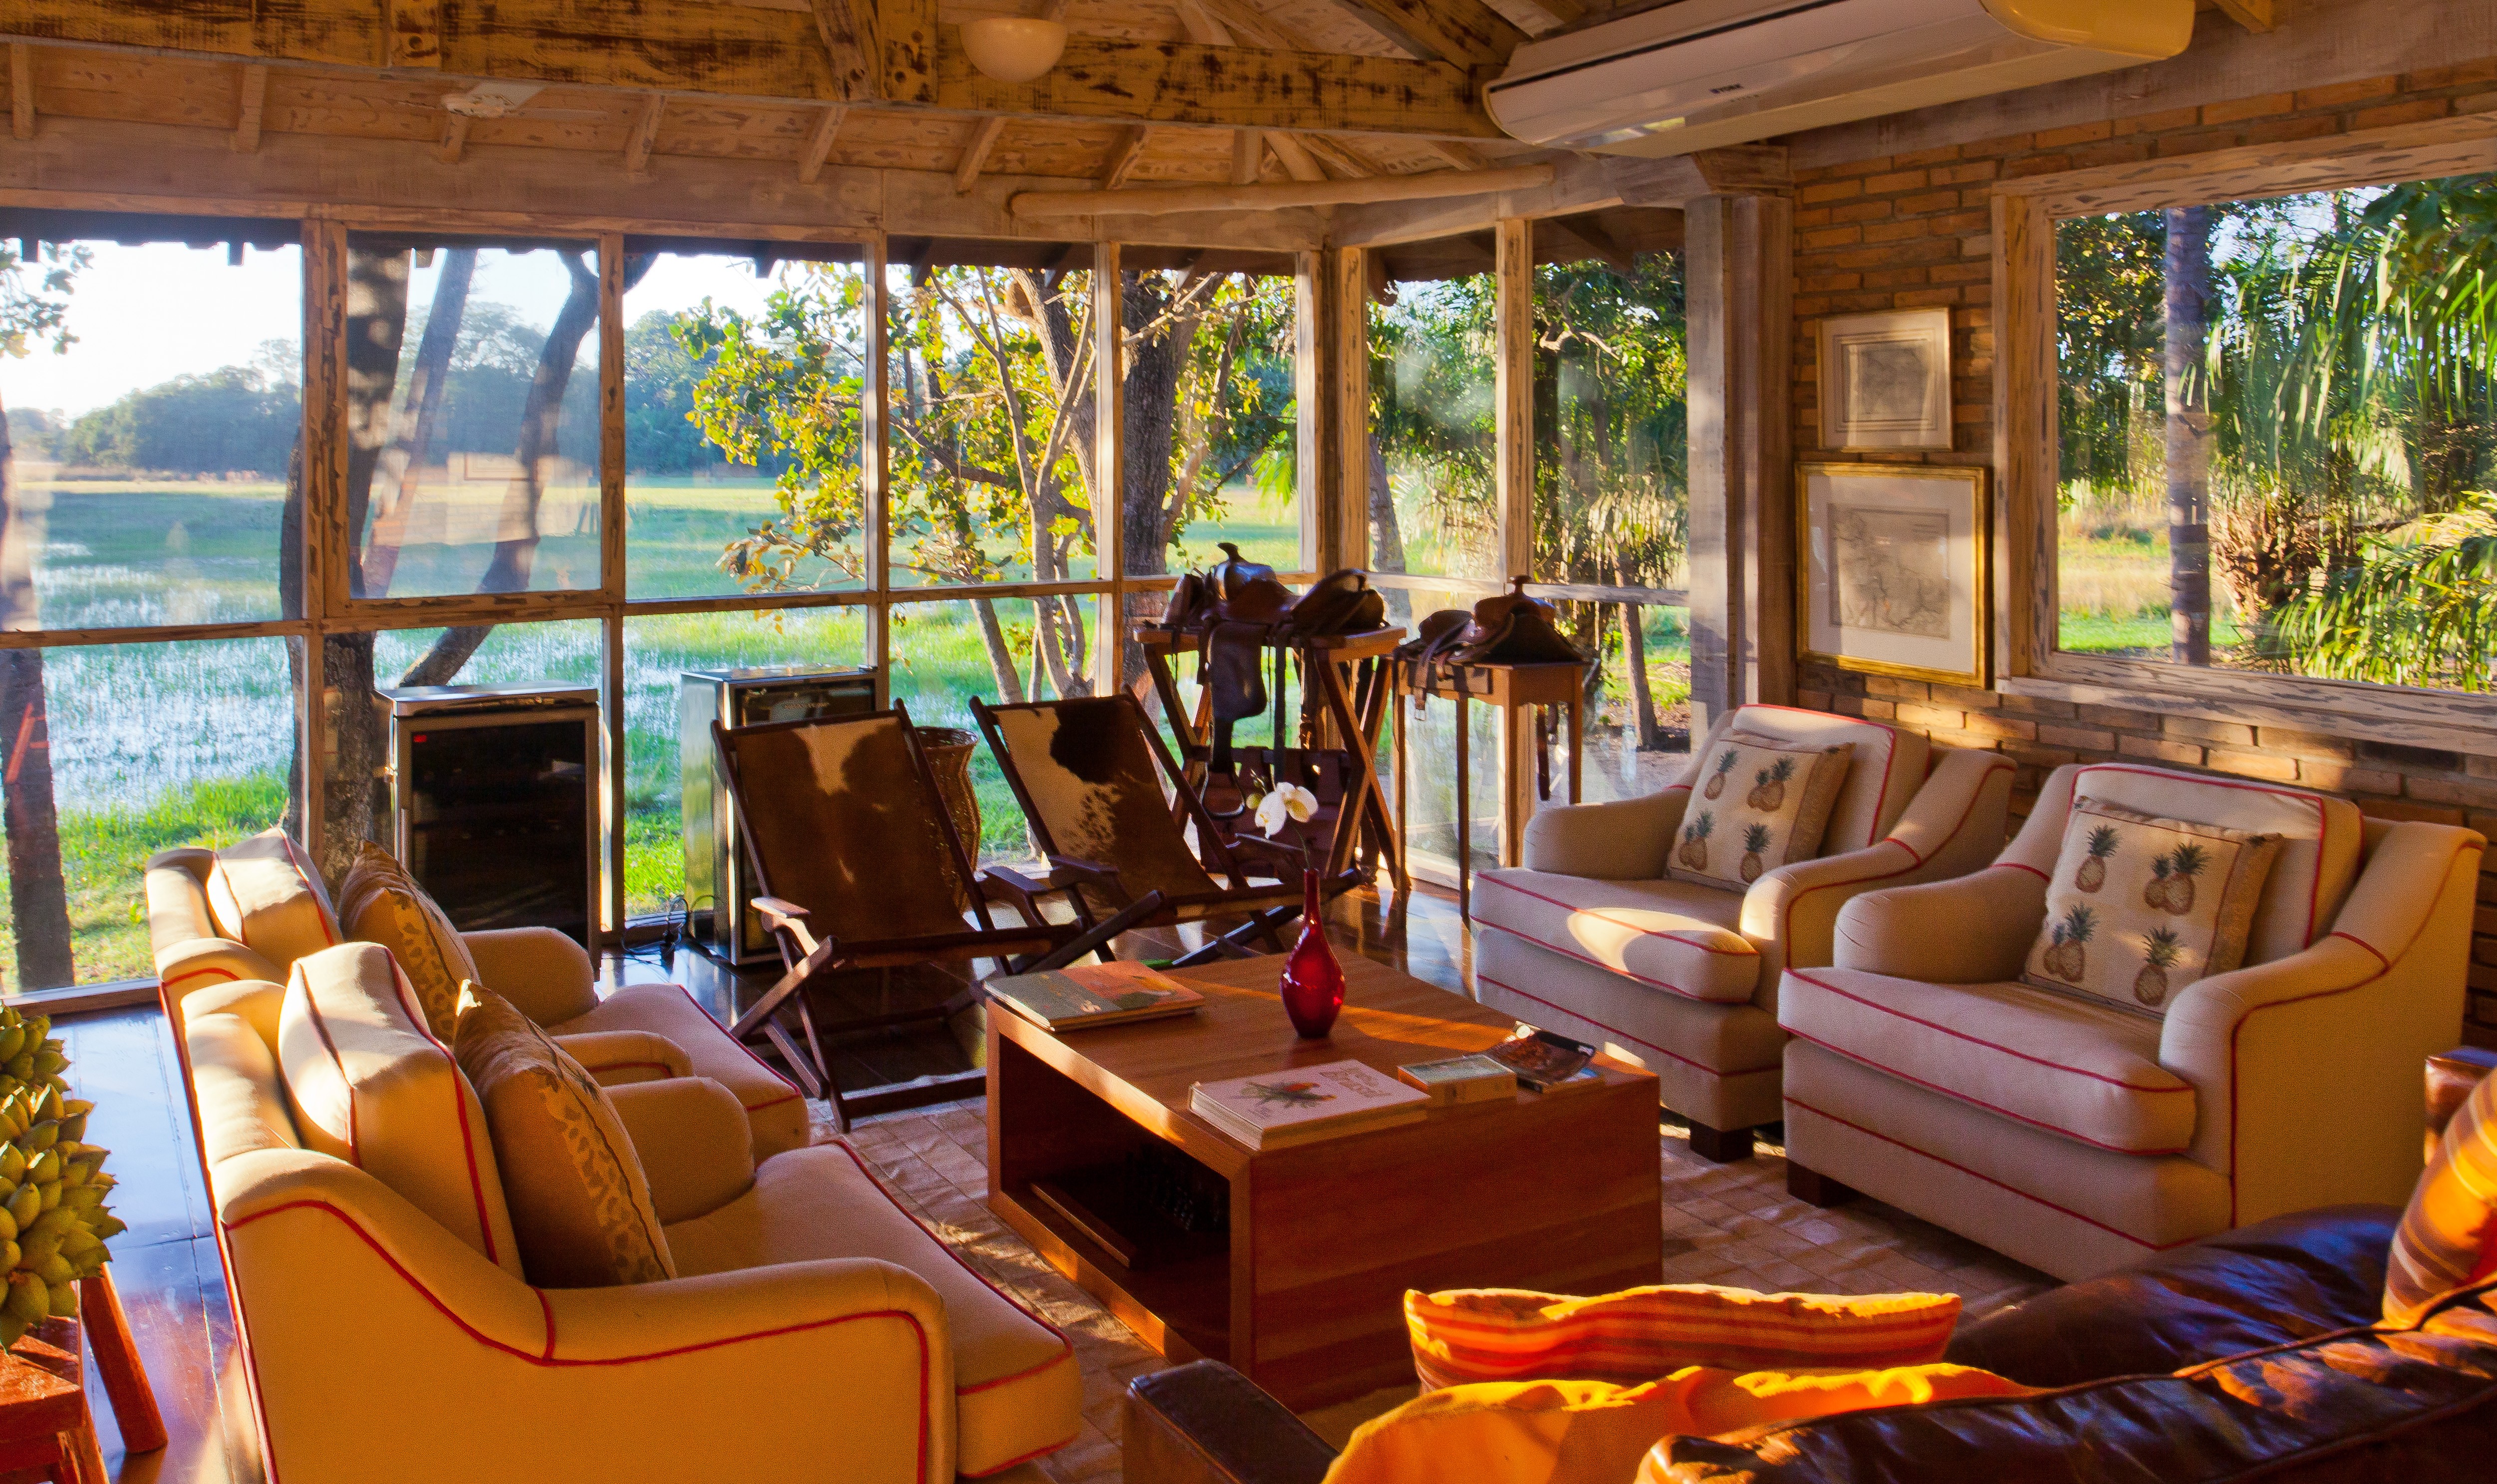 Caiman Lodge Sala de estar Cordilheira is situated within the world’s largest freshwater wetlands known as the Pantanal in Brazil.